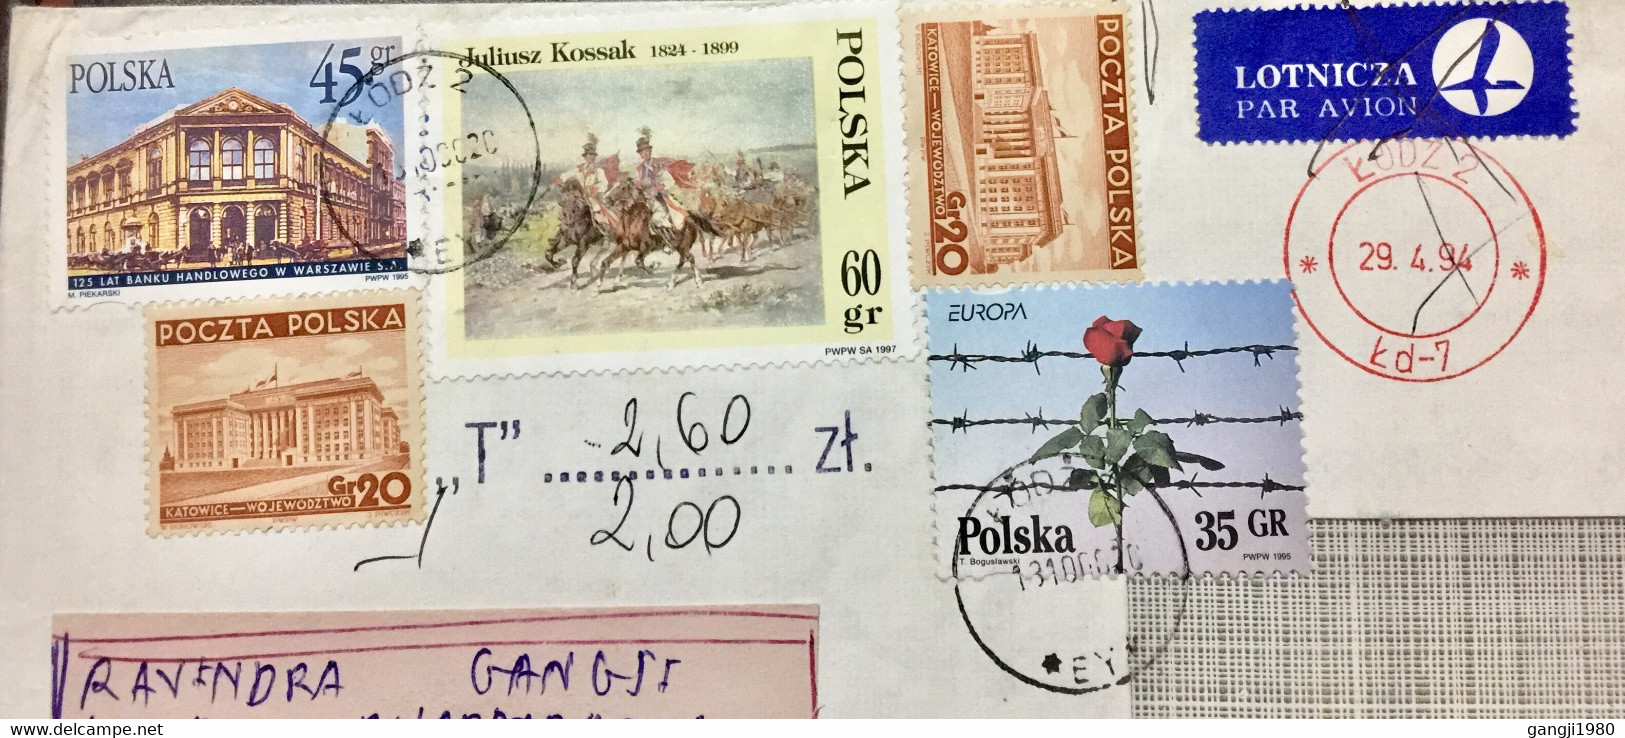 POLAND 2000 ,AIRMAIL METER FRANKED 1994, REUSED COVER EARLY STAMP REJECTED SU DUE “T” 260 ZT, BUILDING,HORSE,FLOWER,PLAN - Storia Postale